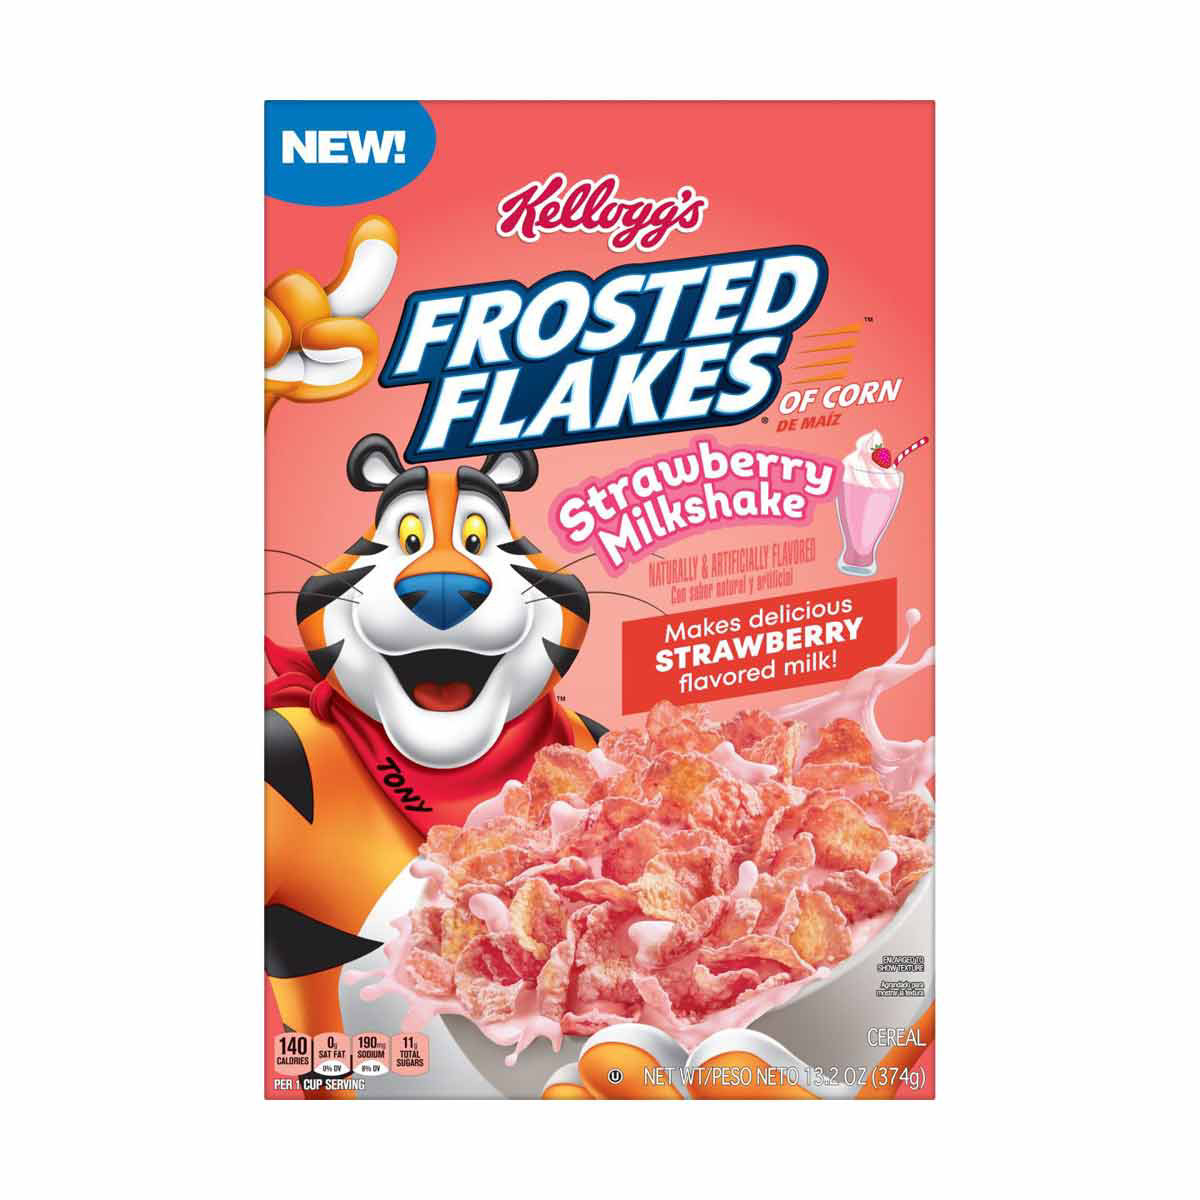 Kellogg's Strawberry Milkshake Frosted Flakes Cereal Review 